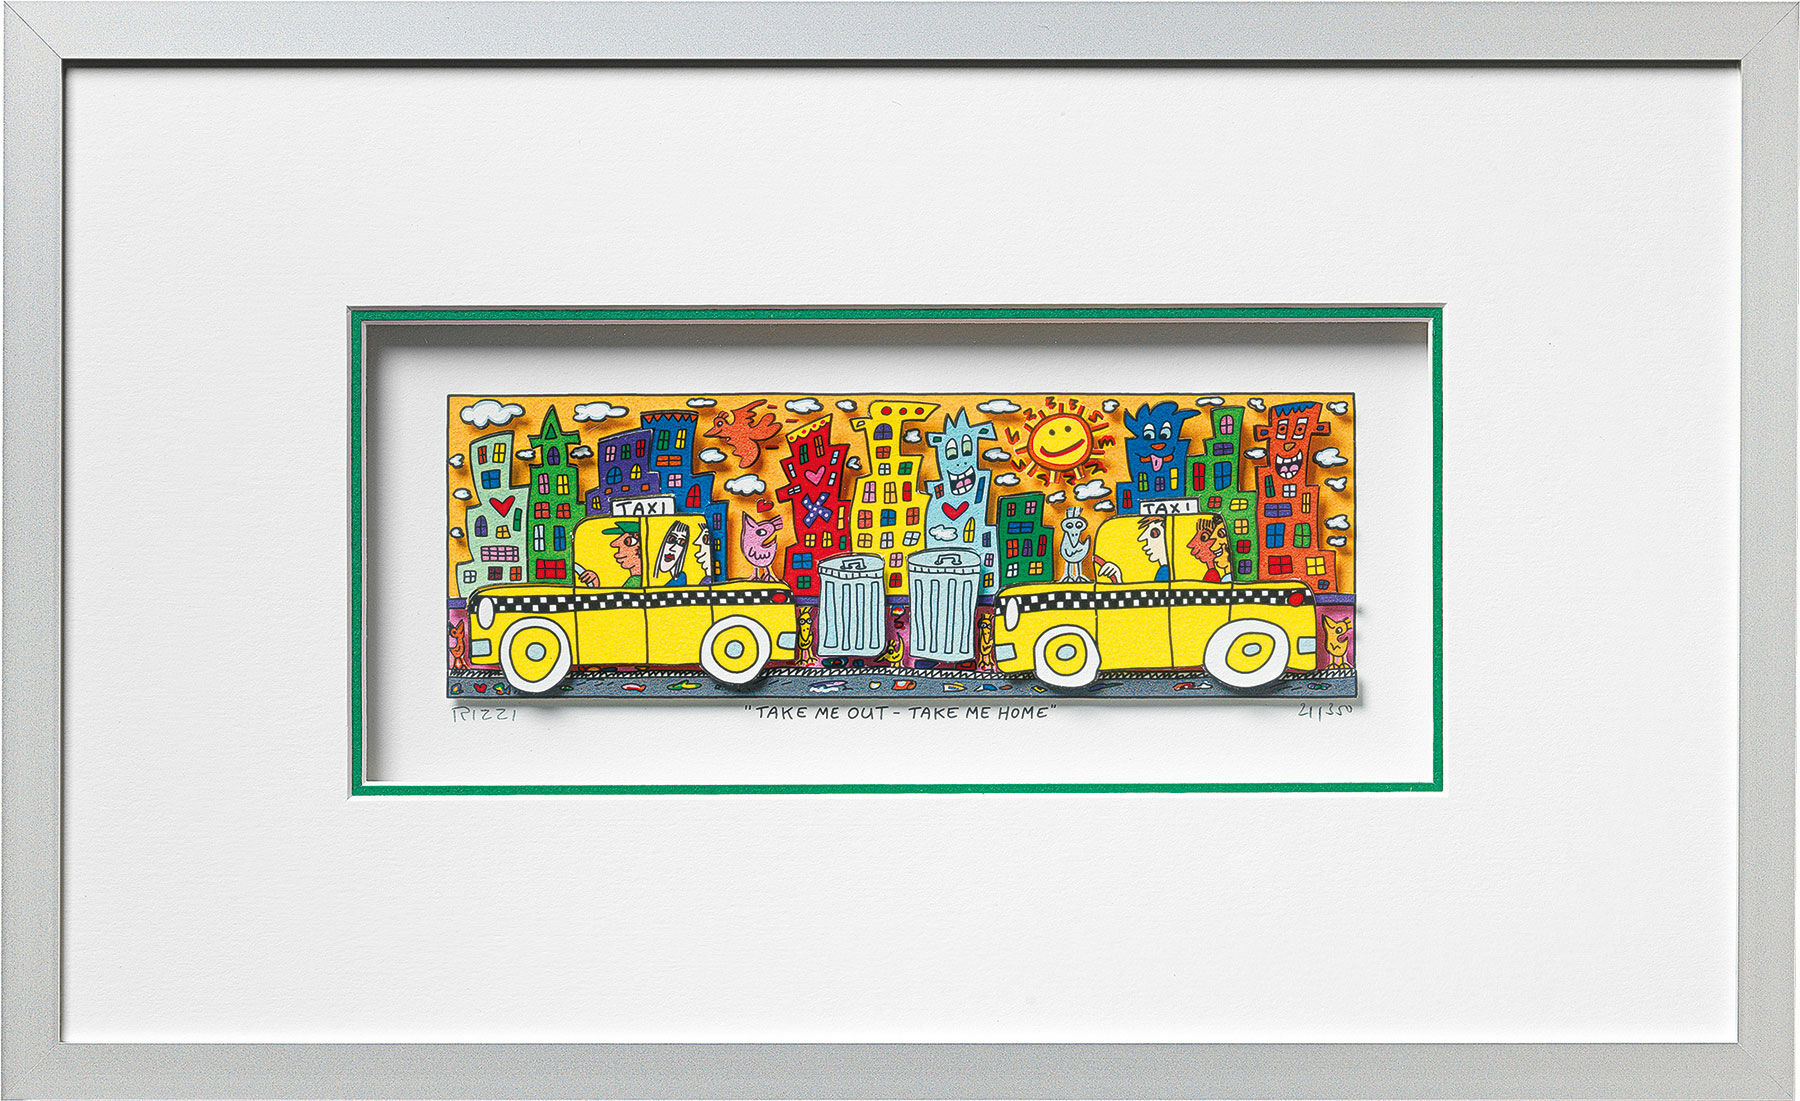 3D Picture "Take me out - take me home", framed by James Rizzi